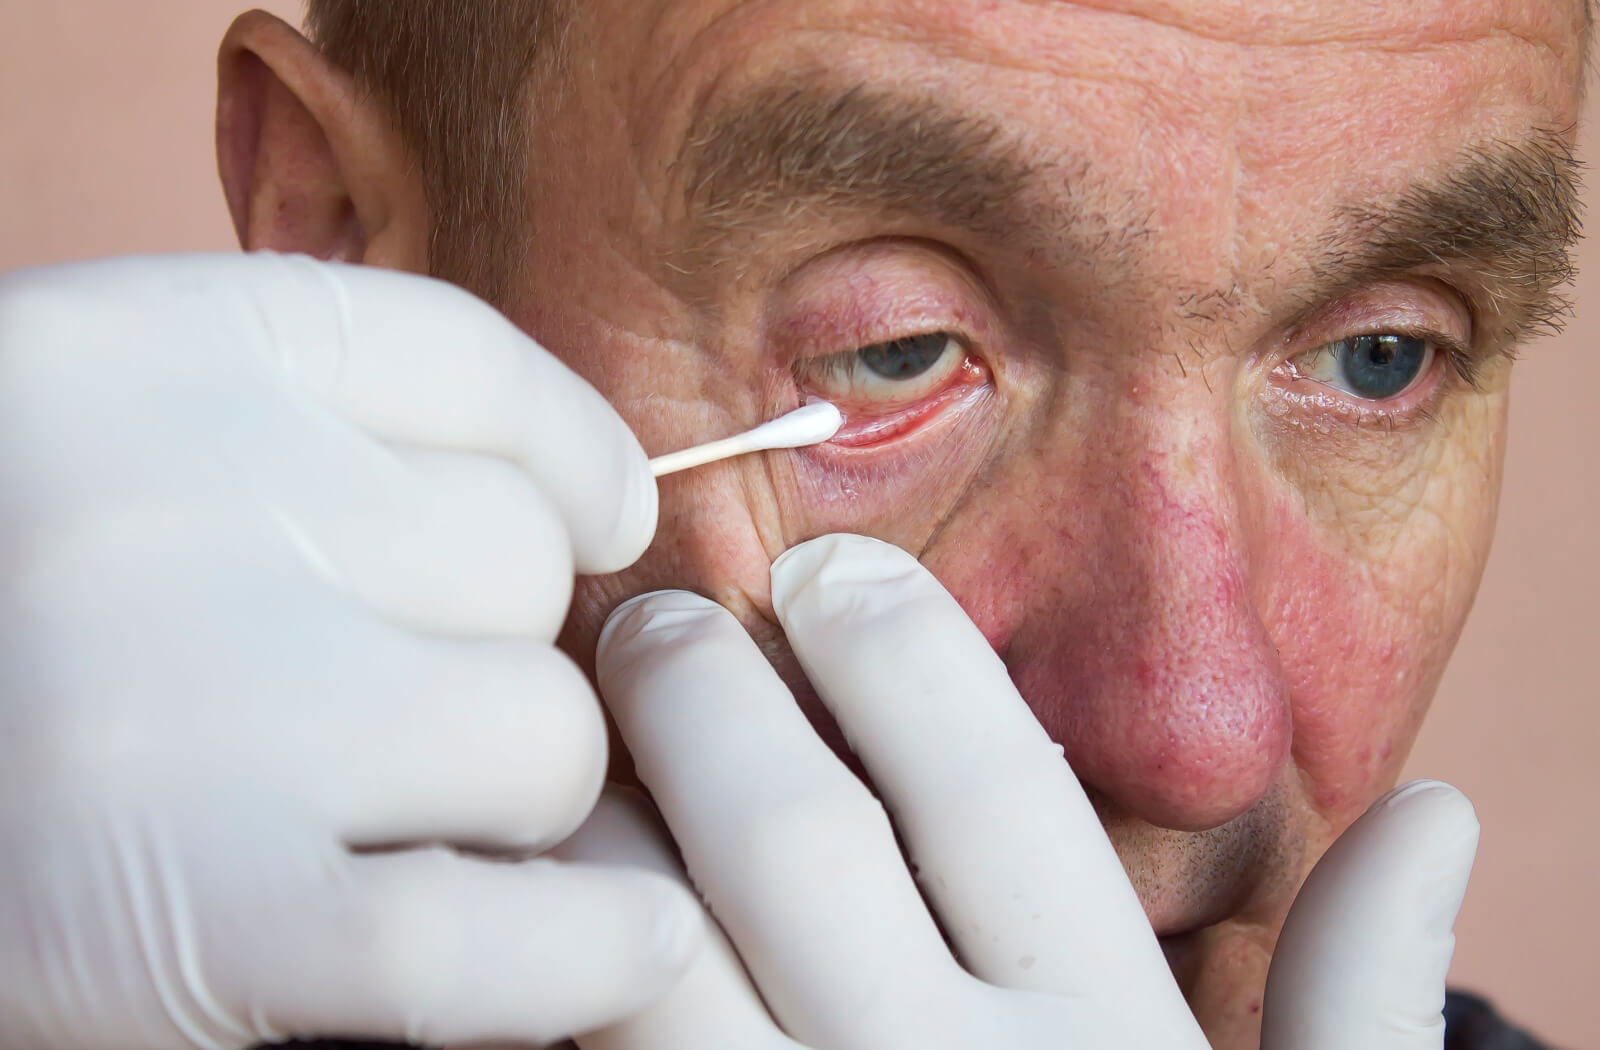 A close-up of a mature man wearing latex gloves on both hands is applying an eye ointment to cure pink eye.